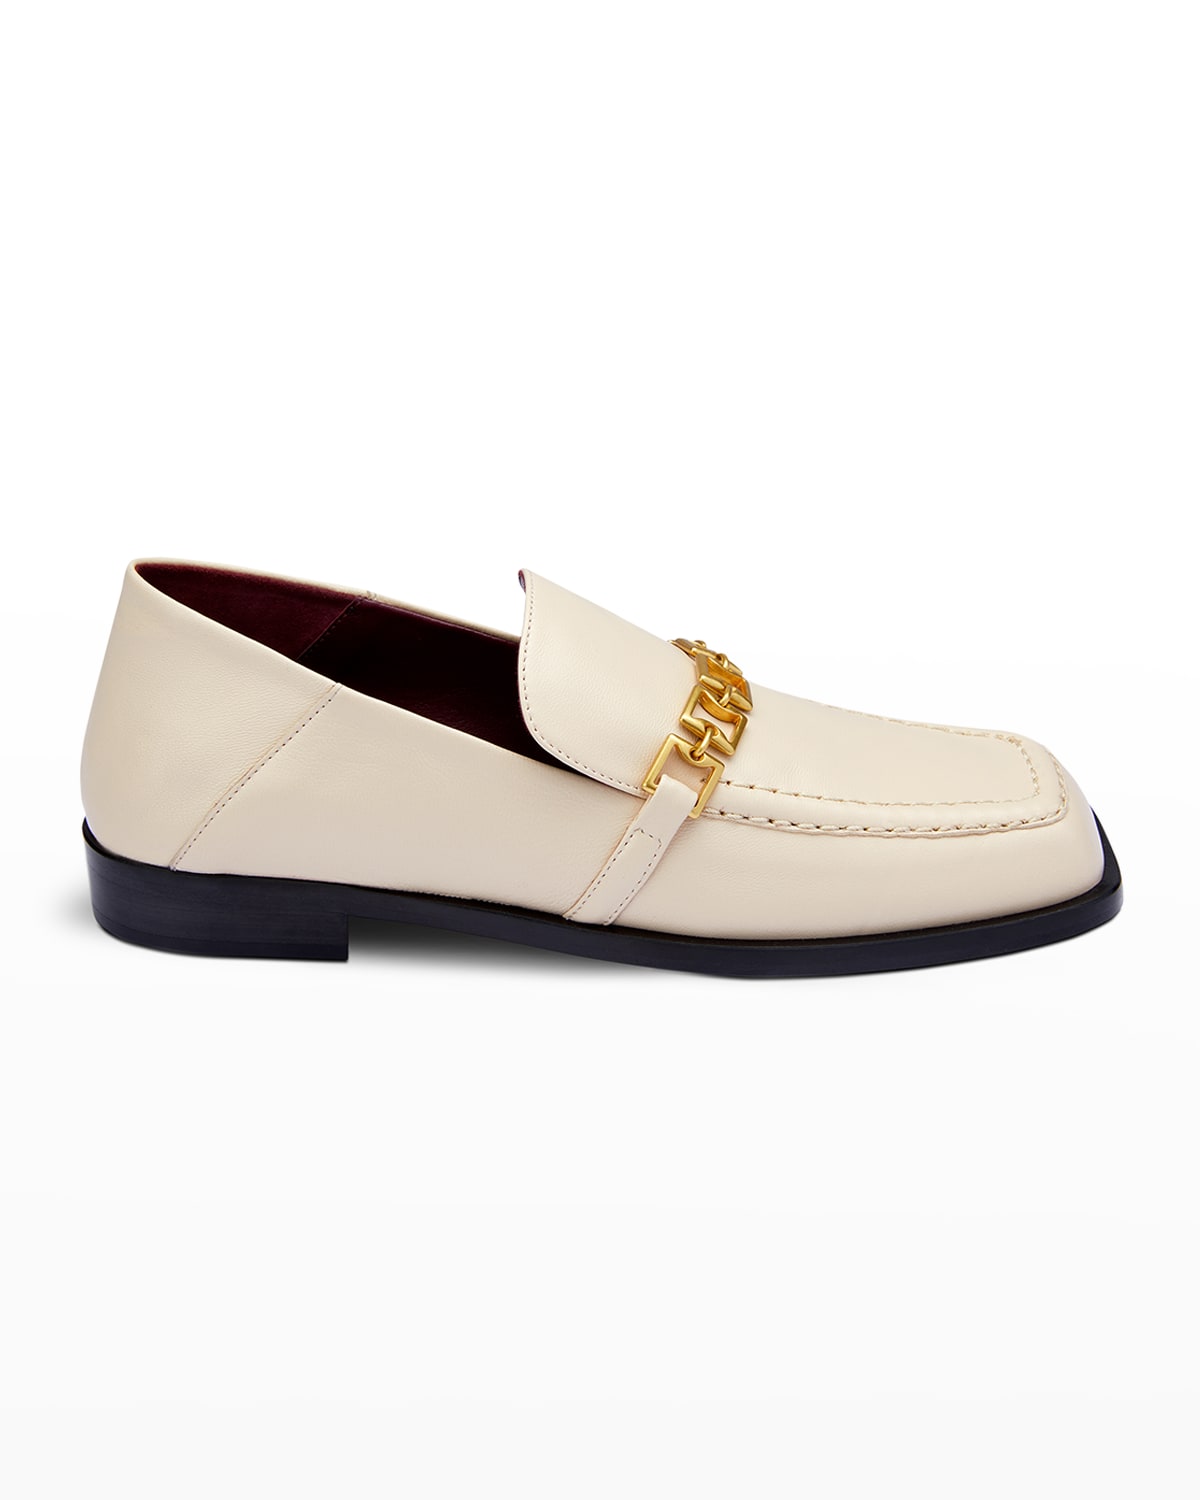 MANU ATELIER The Tap Napa Chain Loafers